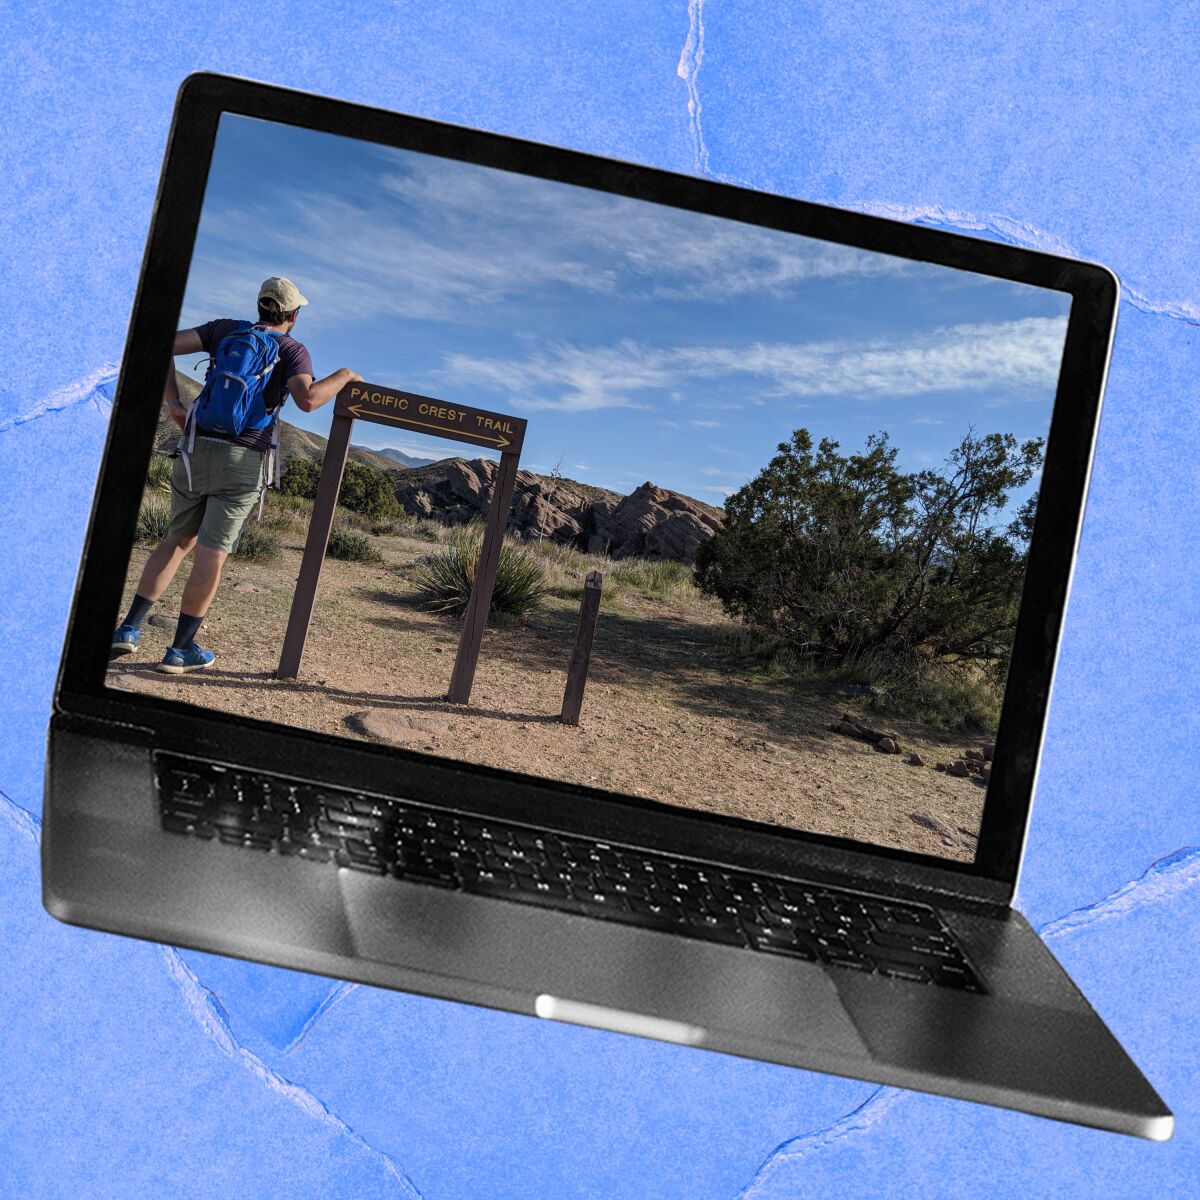 Illustration of a laptop with a photo of a person wearing a backpack and standing next to a trail sign.